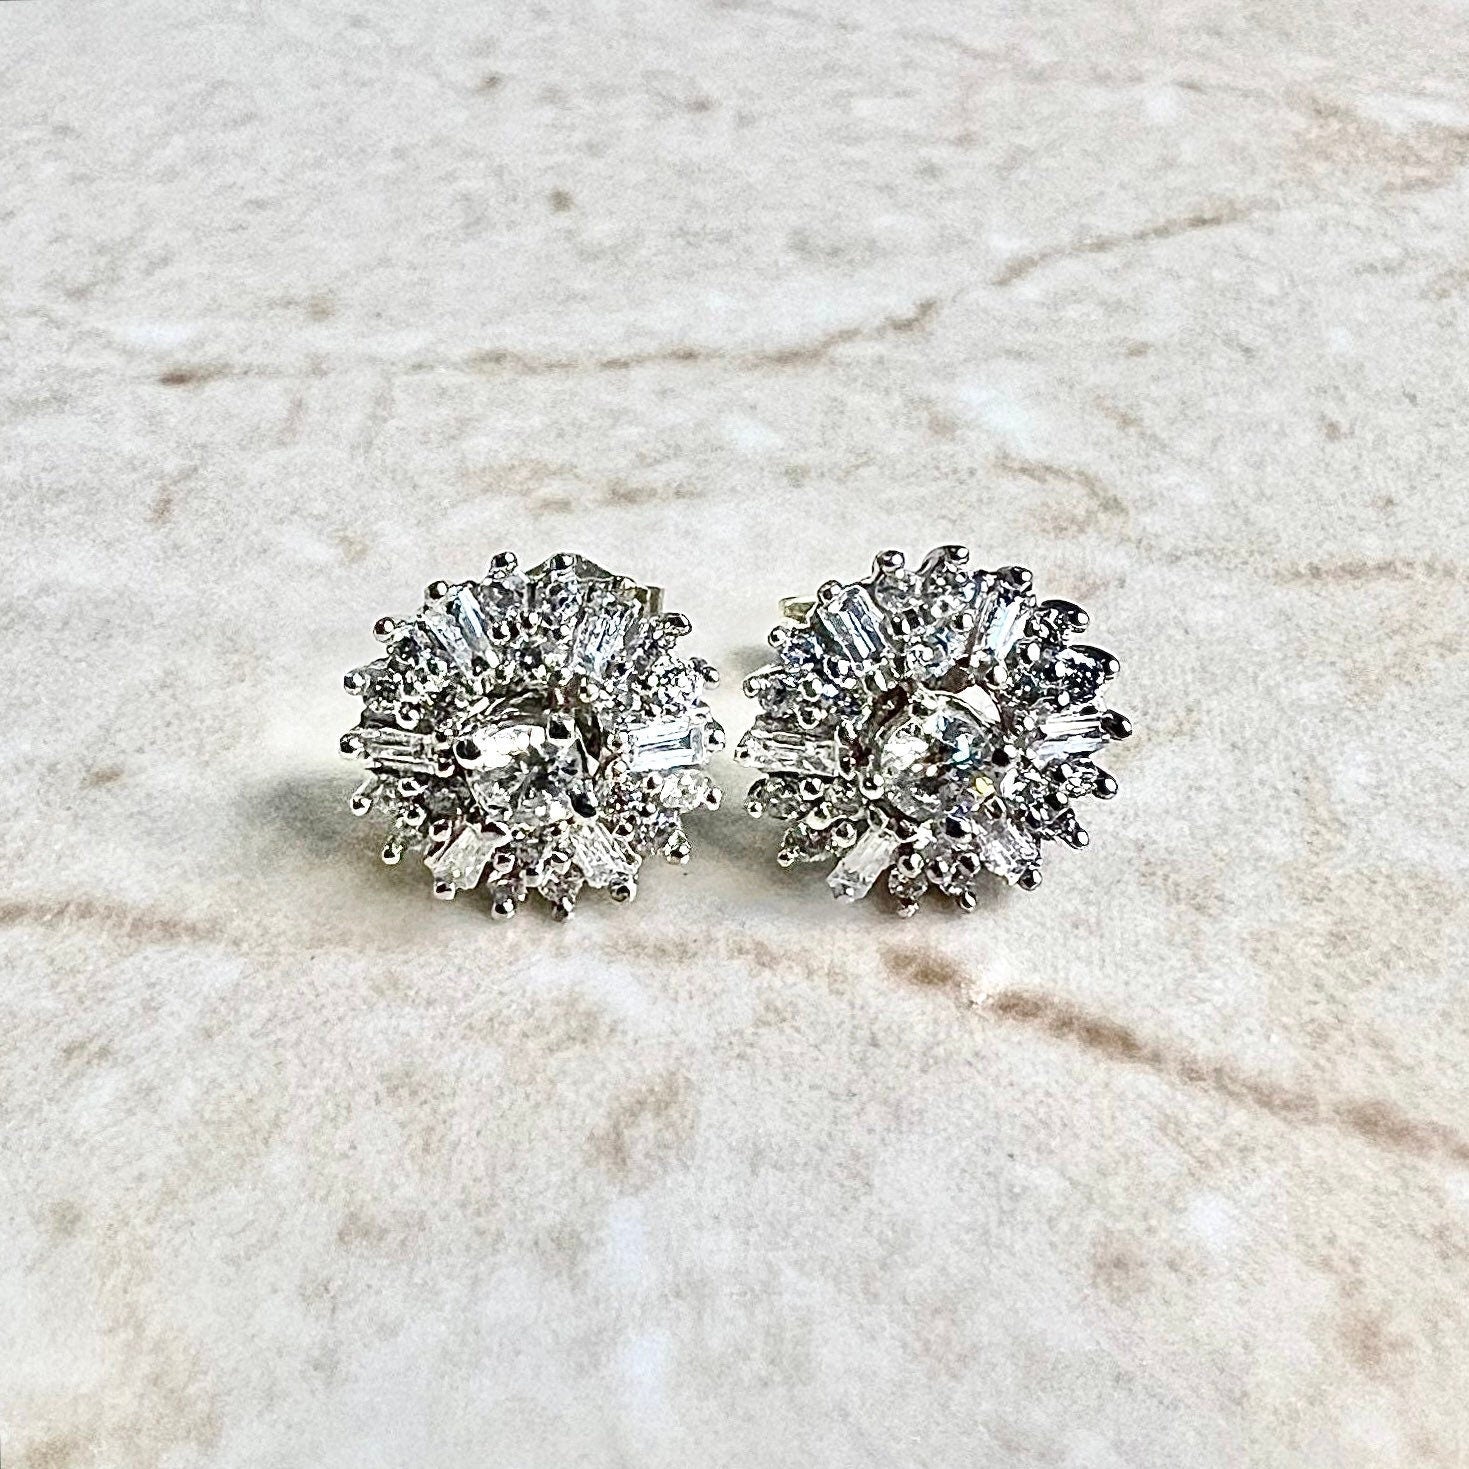 14K Round Diamond Halo Stud Earrings 0.50 CTTW - 14K White Gold Diamond Studs - Diamond Halo Earring - Anniversary Gift - Best Gifts For Her